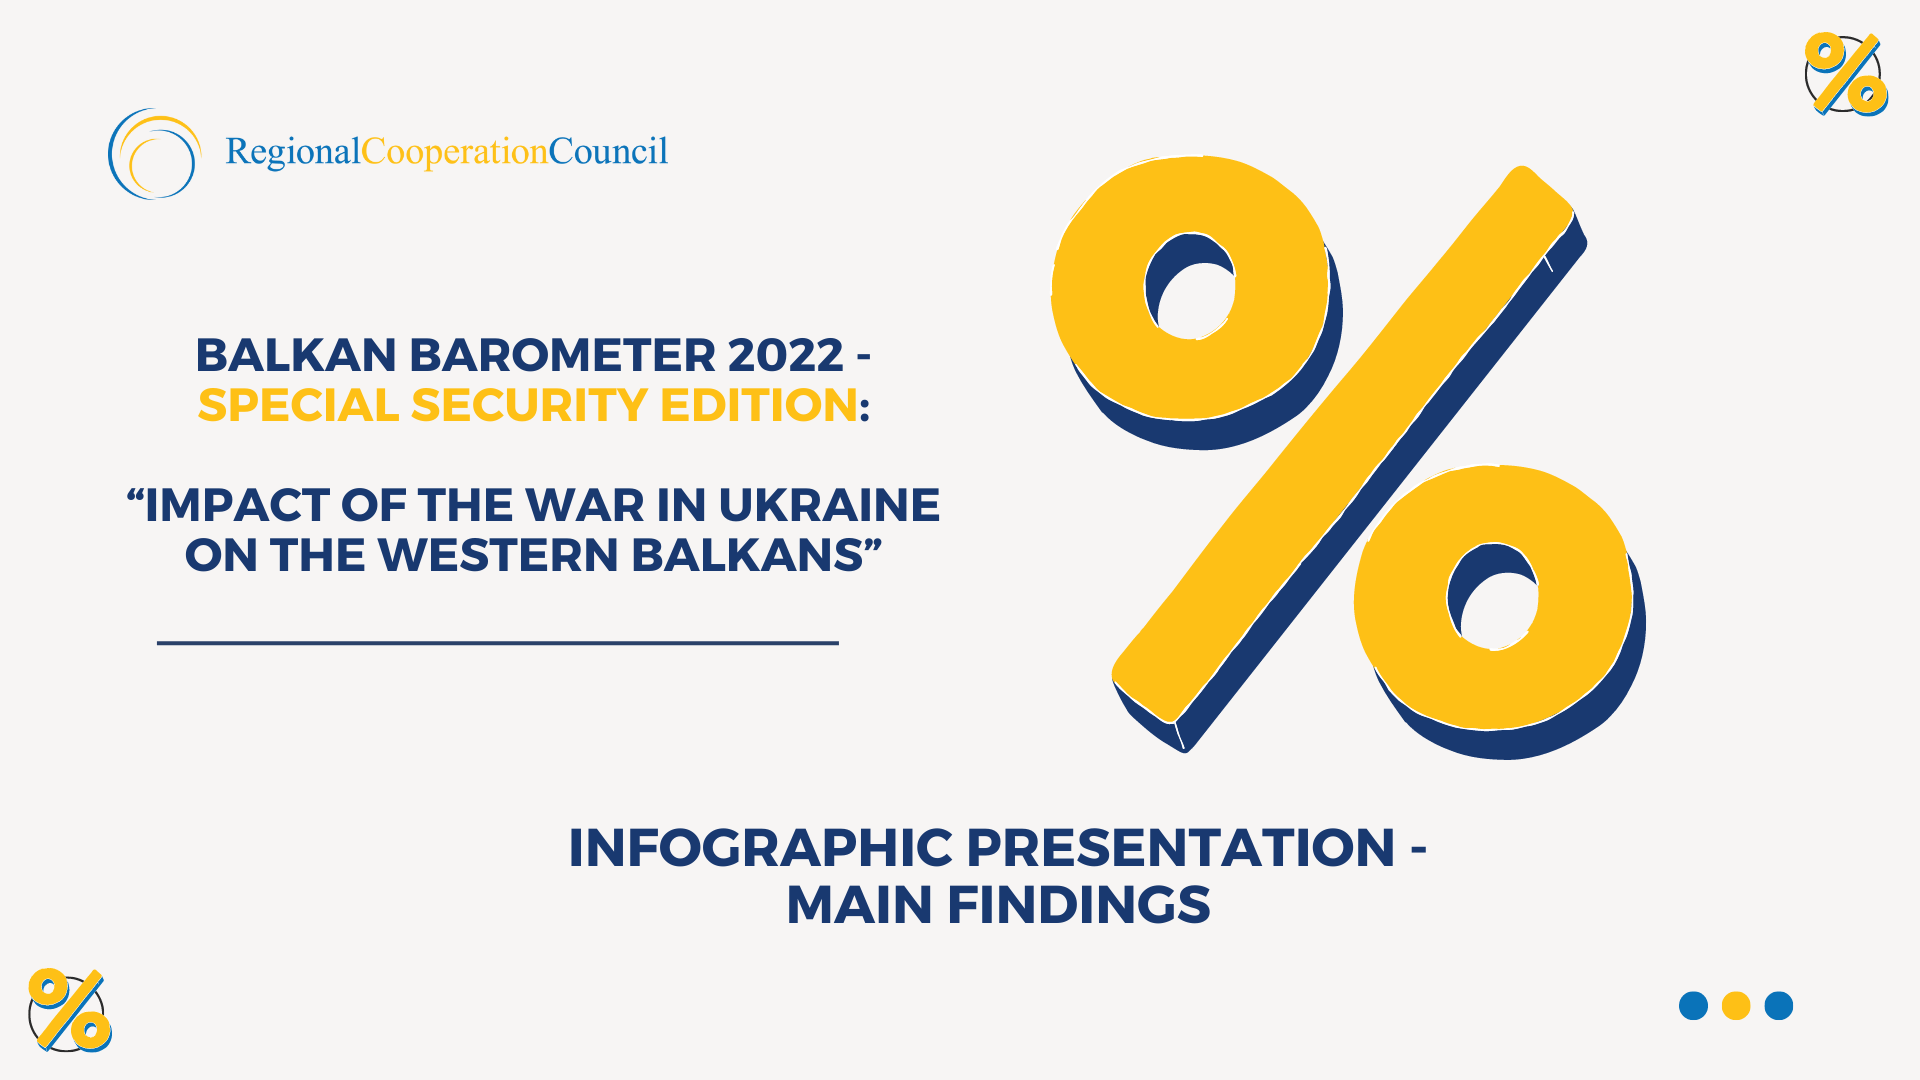 Infographic presentation - Main findings - Balkan Barometer 2022 - Special Security edition, “Impact of the war in Ukraine on the Western Balkans (Balkans Public and Business Opinion).